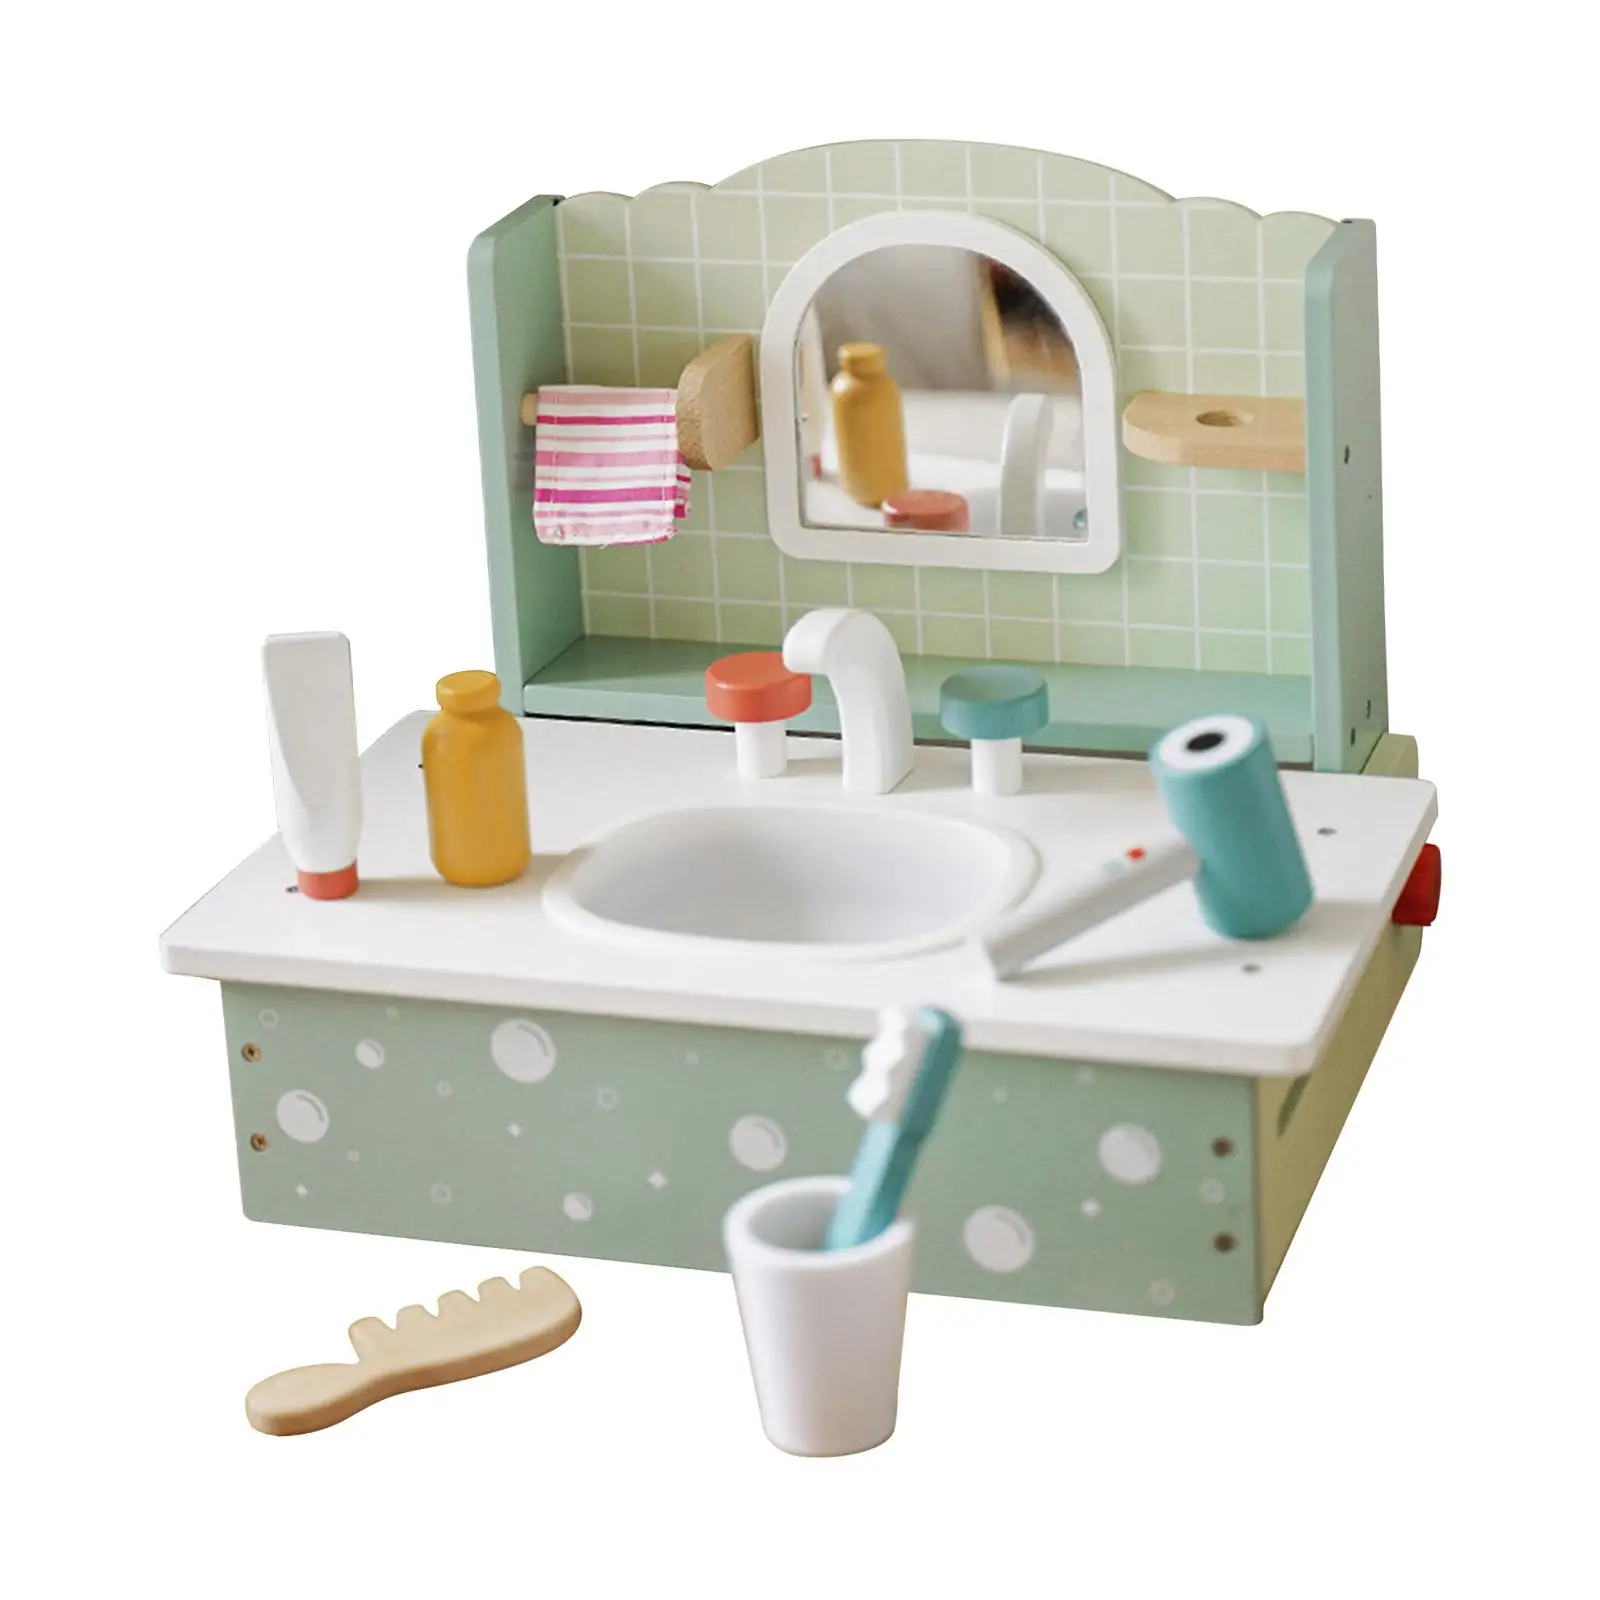 Makeup Beauty Dressing Table Washing Basin Toy Set Table Dresser Set Playset Kids Makeup Vanity Toy for Children Birthday Gifts